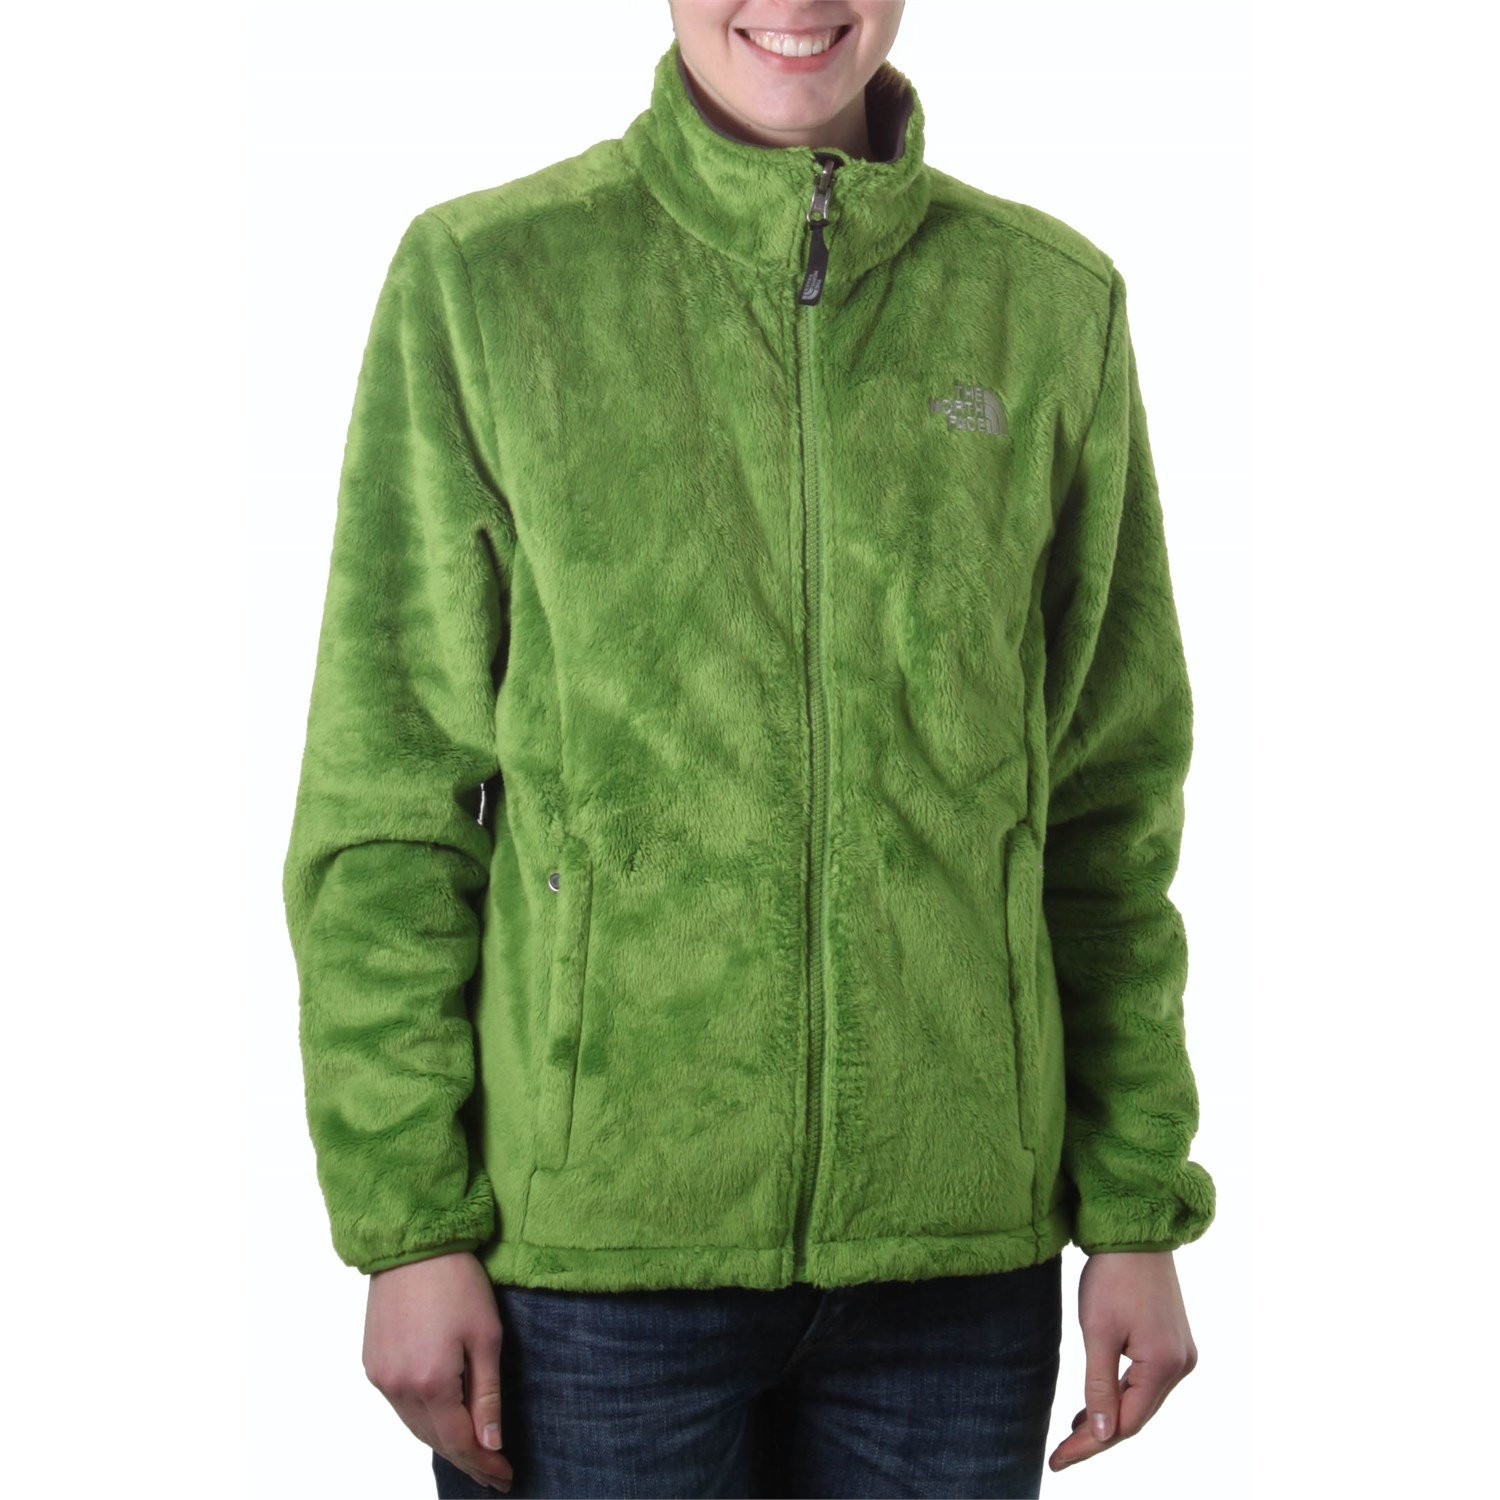 The North Face Osito Jacket 